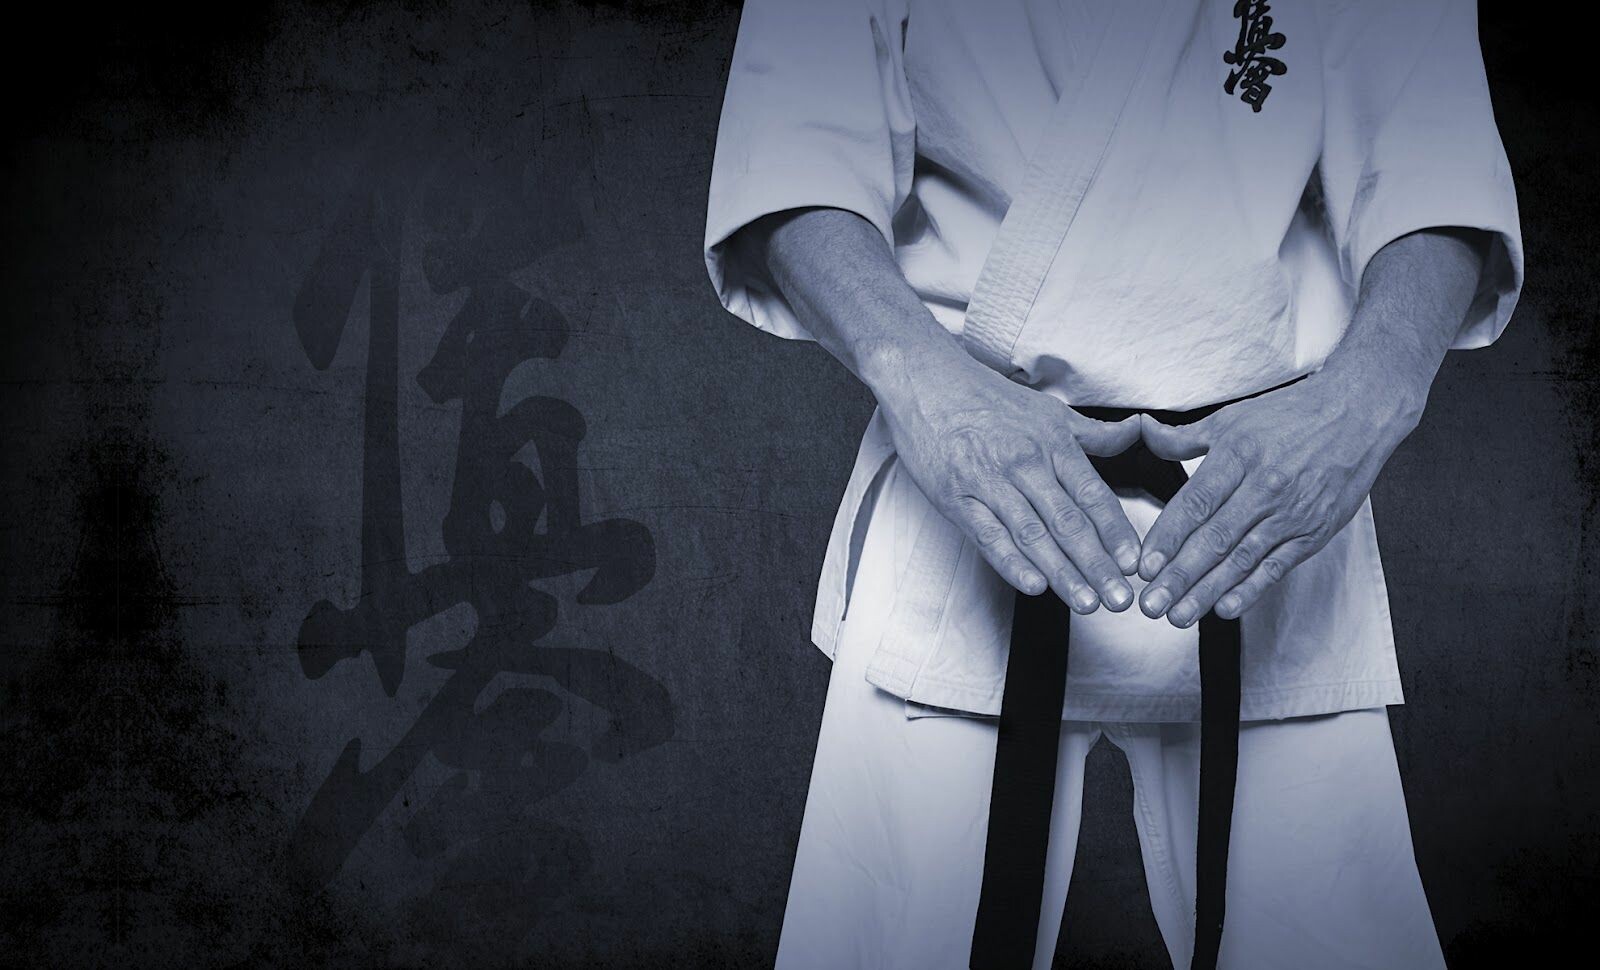 52+ Karate Wallpapers: HD, 4K, 5K for PC and Mobile | Download free images  for iPhone, Android